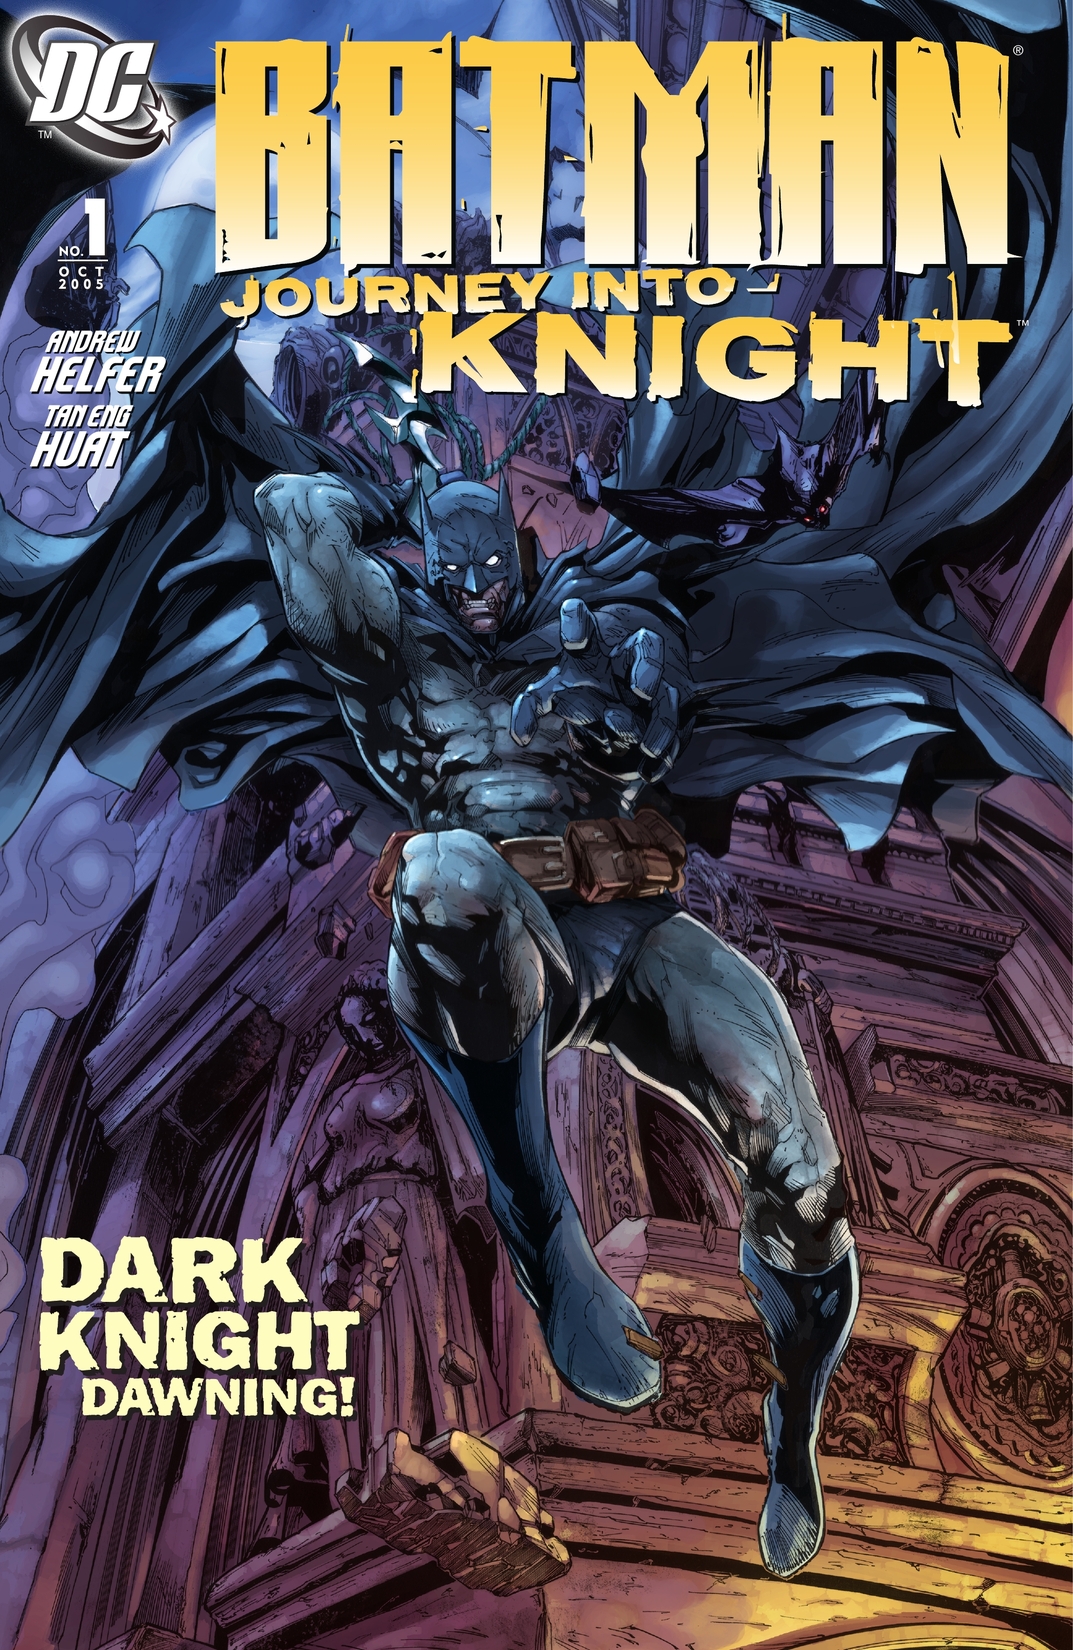 Batman: Journey into Knight #1 preview images